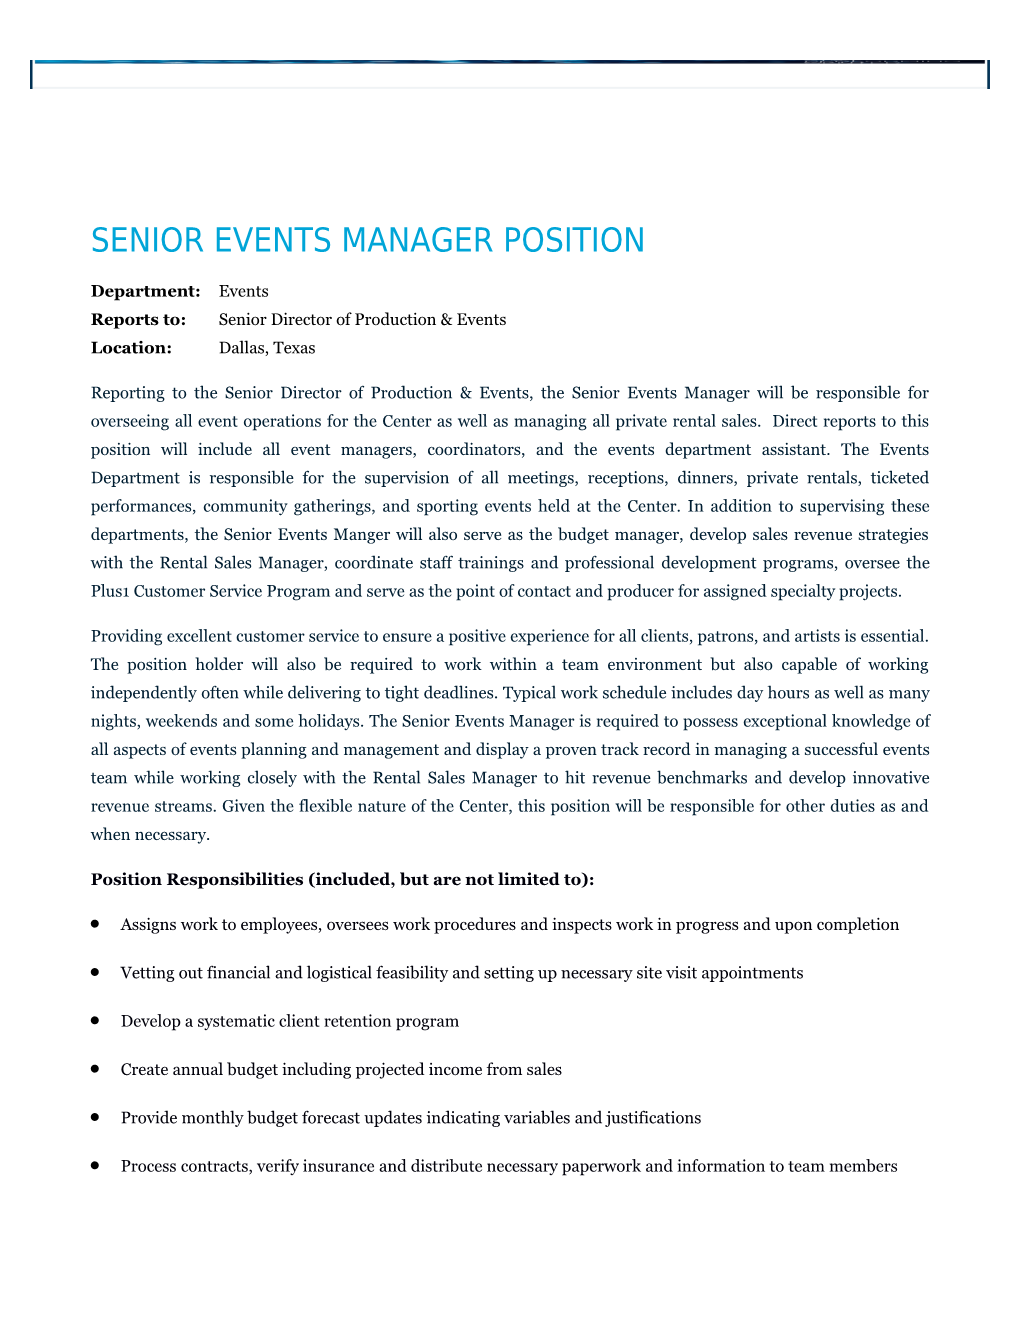 Senior Events Manager Position